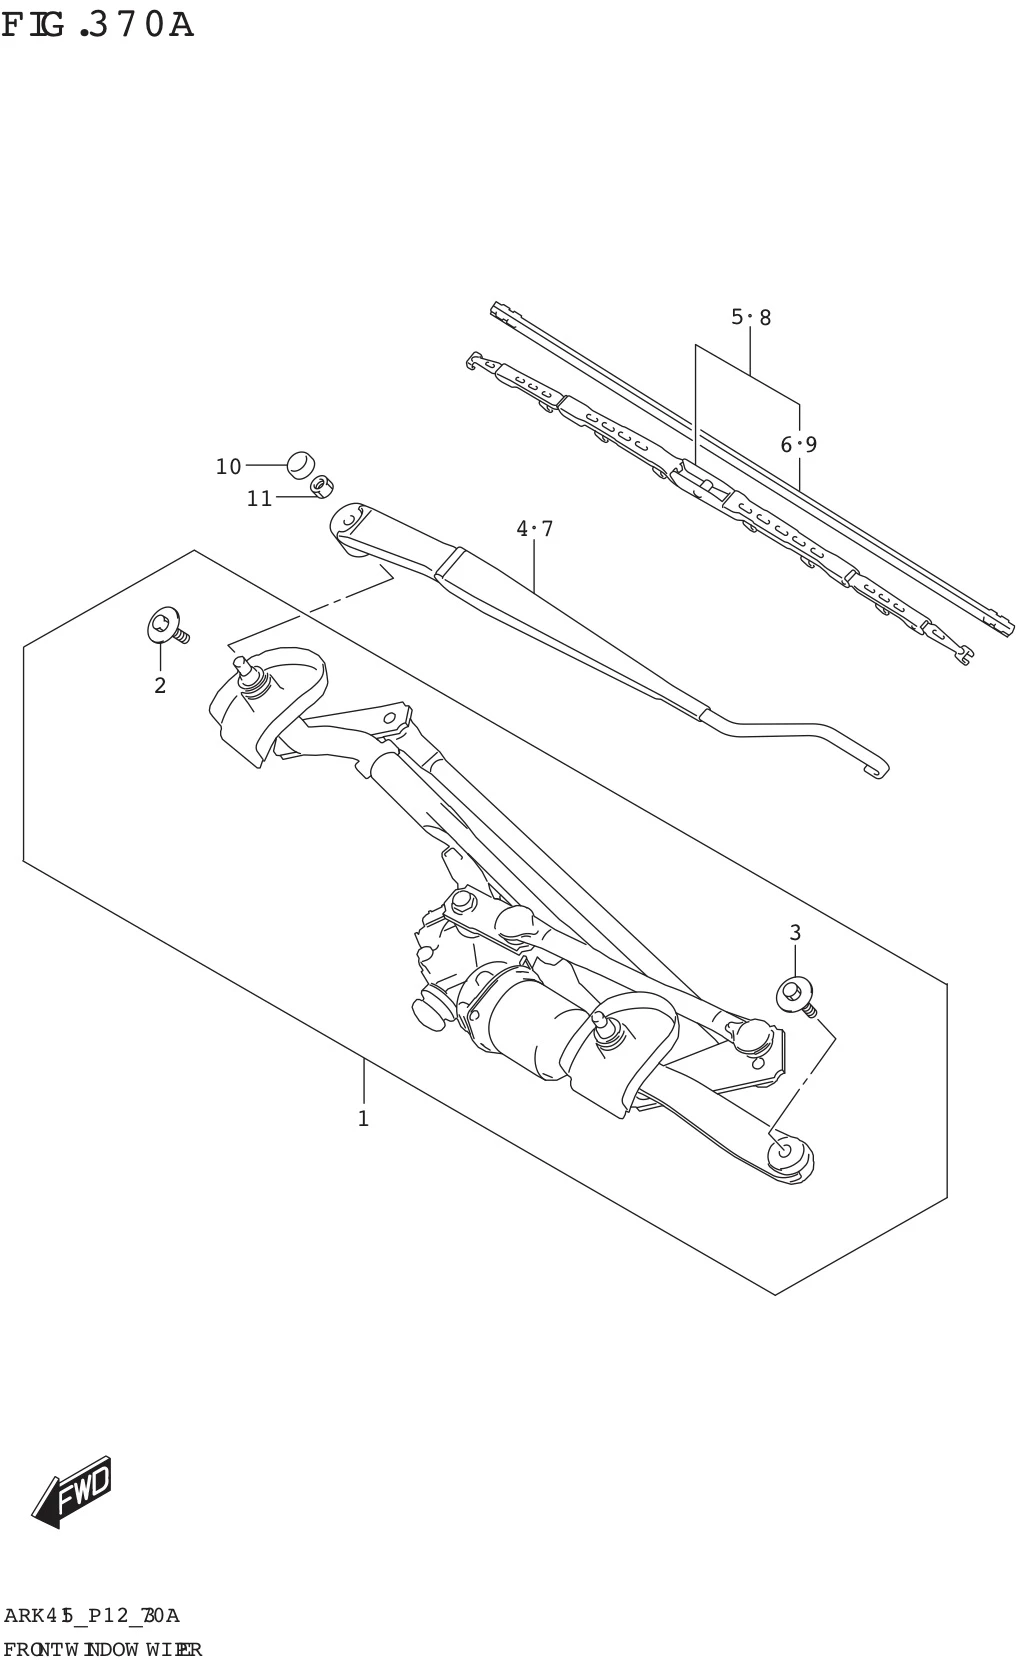 FIG. 370A FRONT WINDOW WIPER